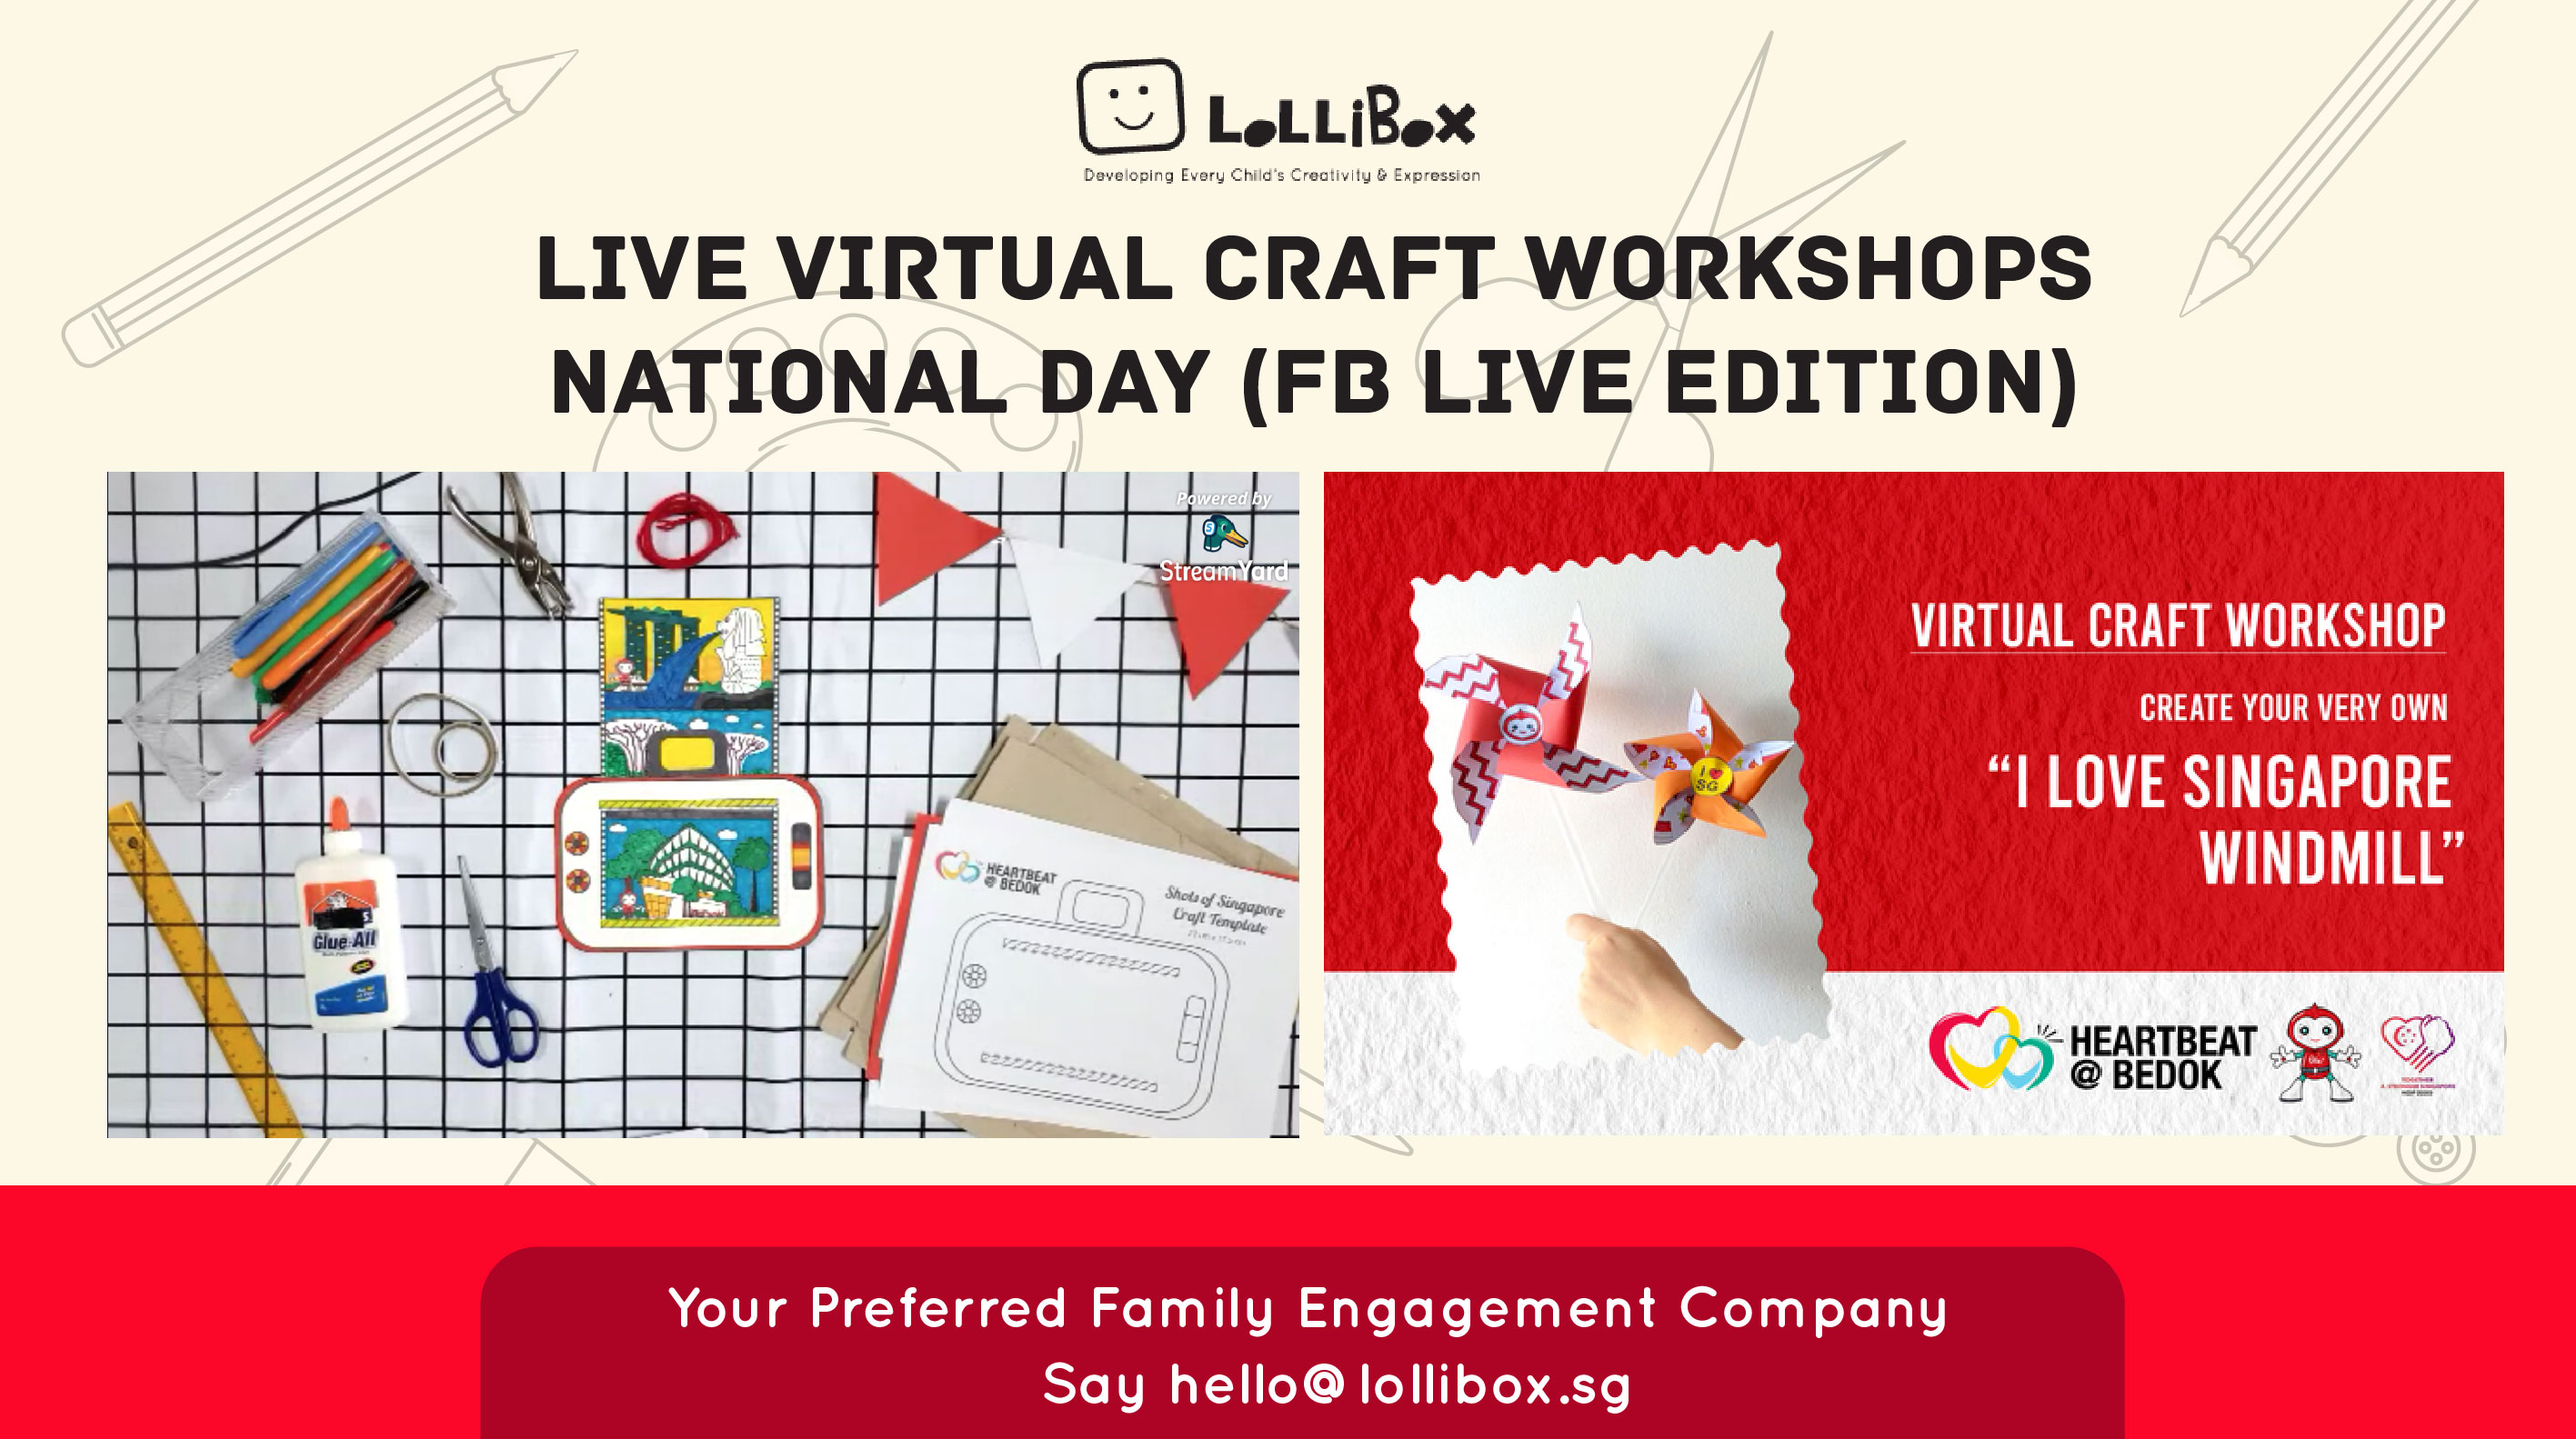 LolliBoxs National Day Virtual Craft Workshops Services via FB LIVE, ZOOM and more!